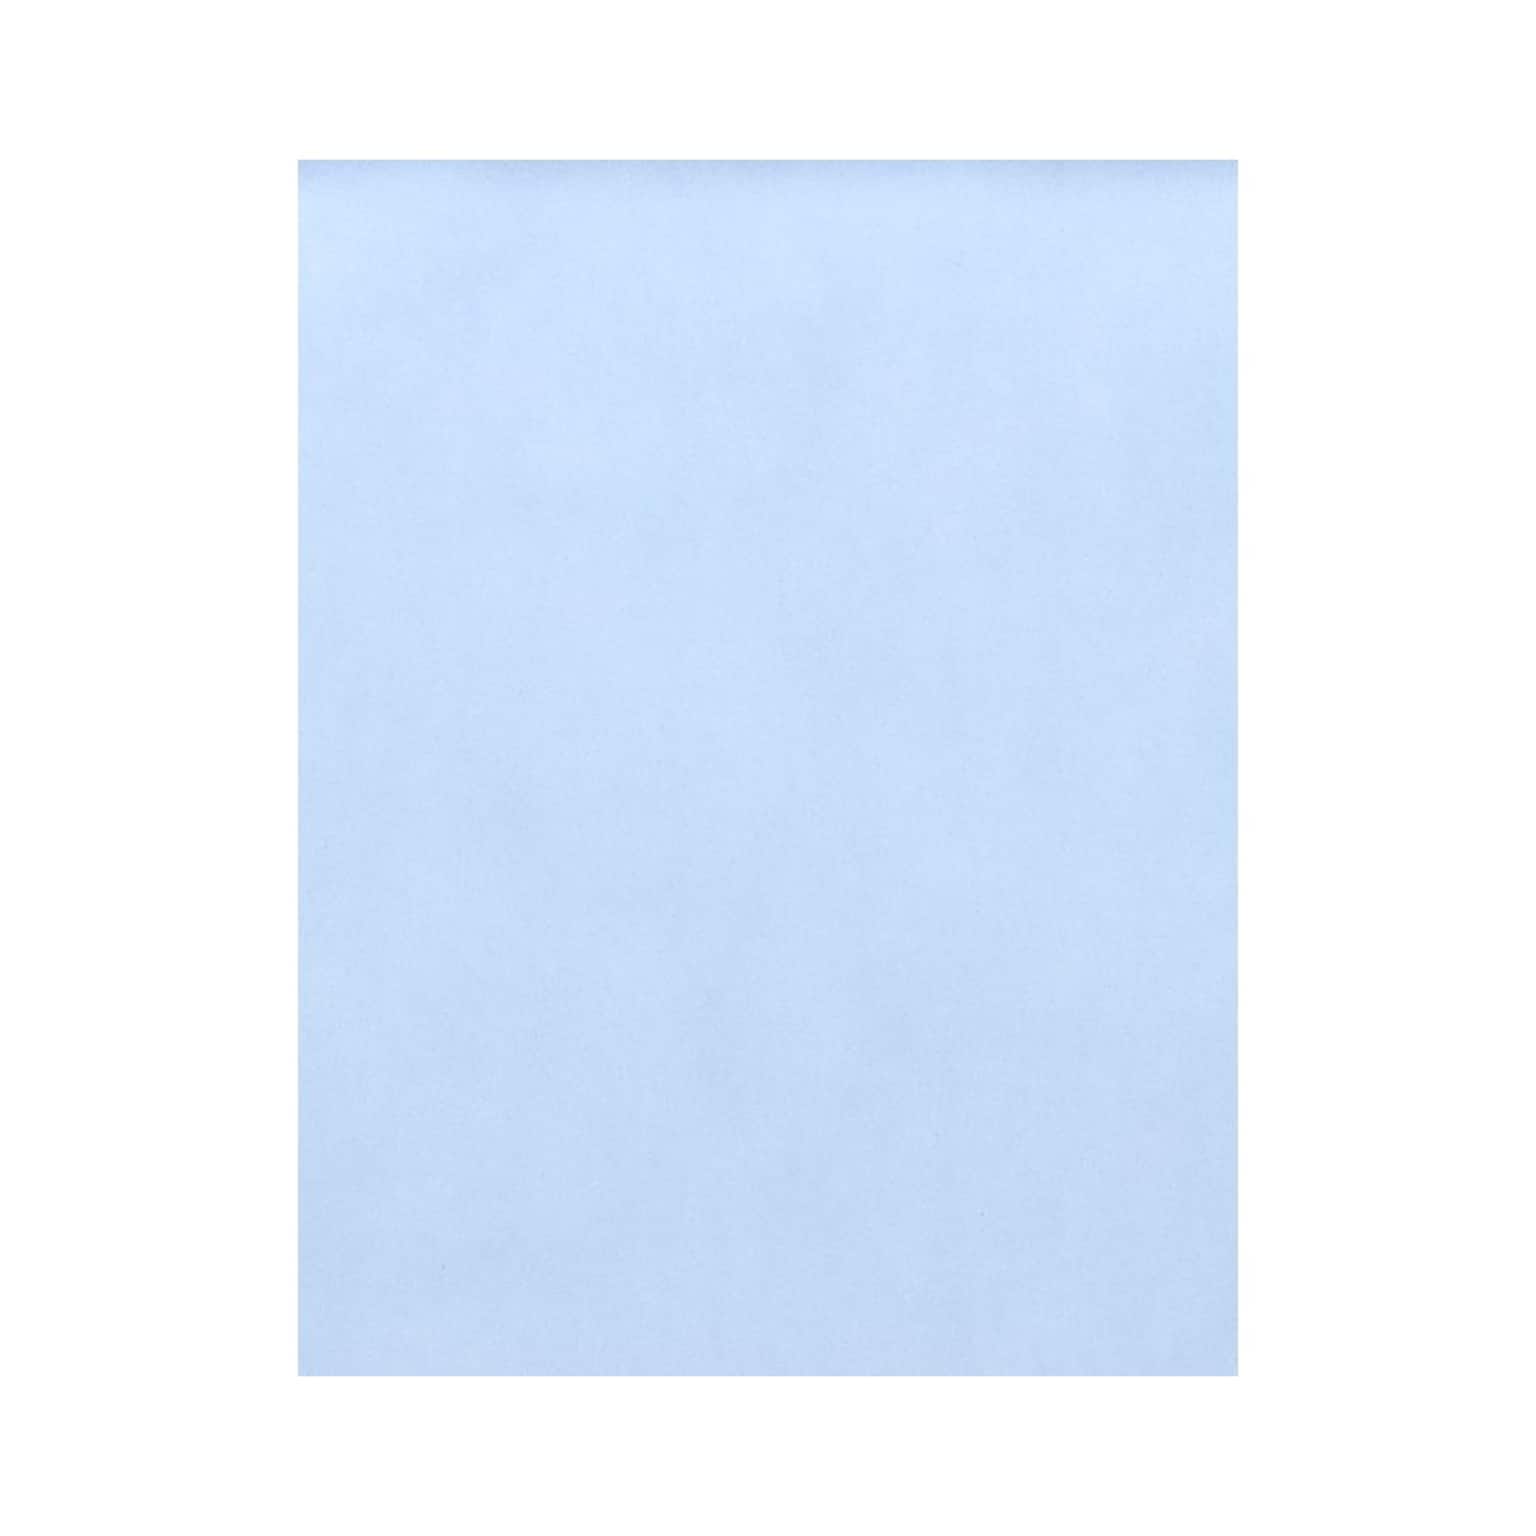 LUX Colored Paper, 32 lbs., 8.5 x 11, Baby Blue, 50 Sheets/Pack (81211-P-08-50)